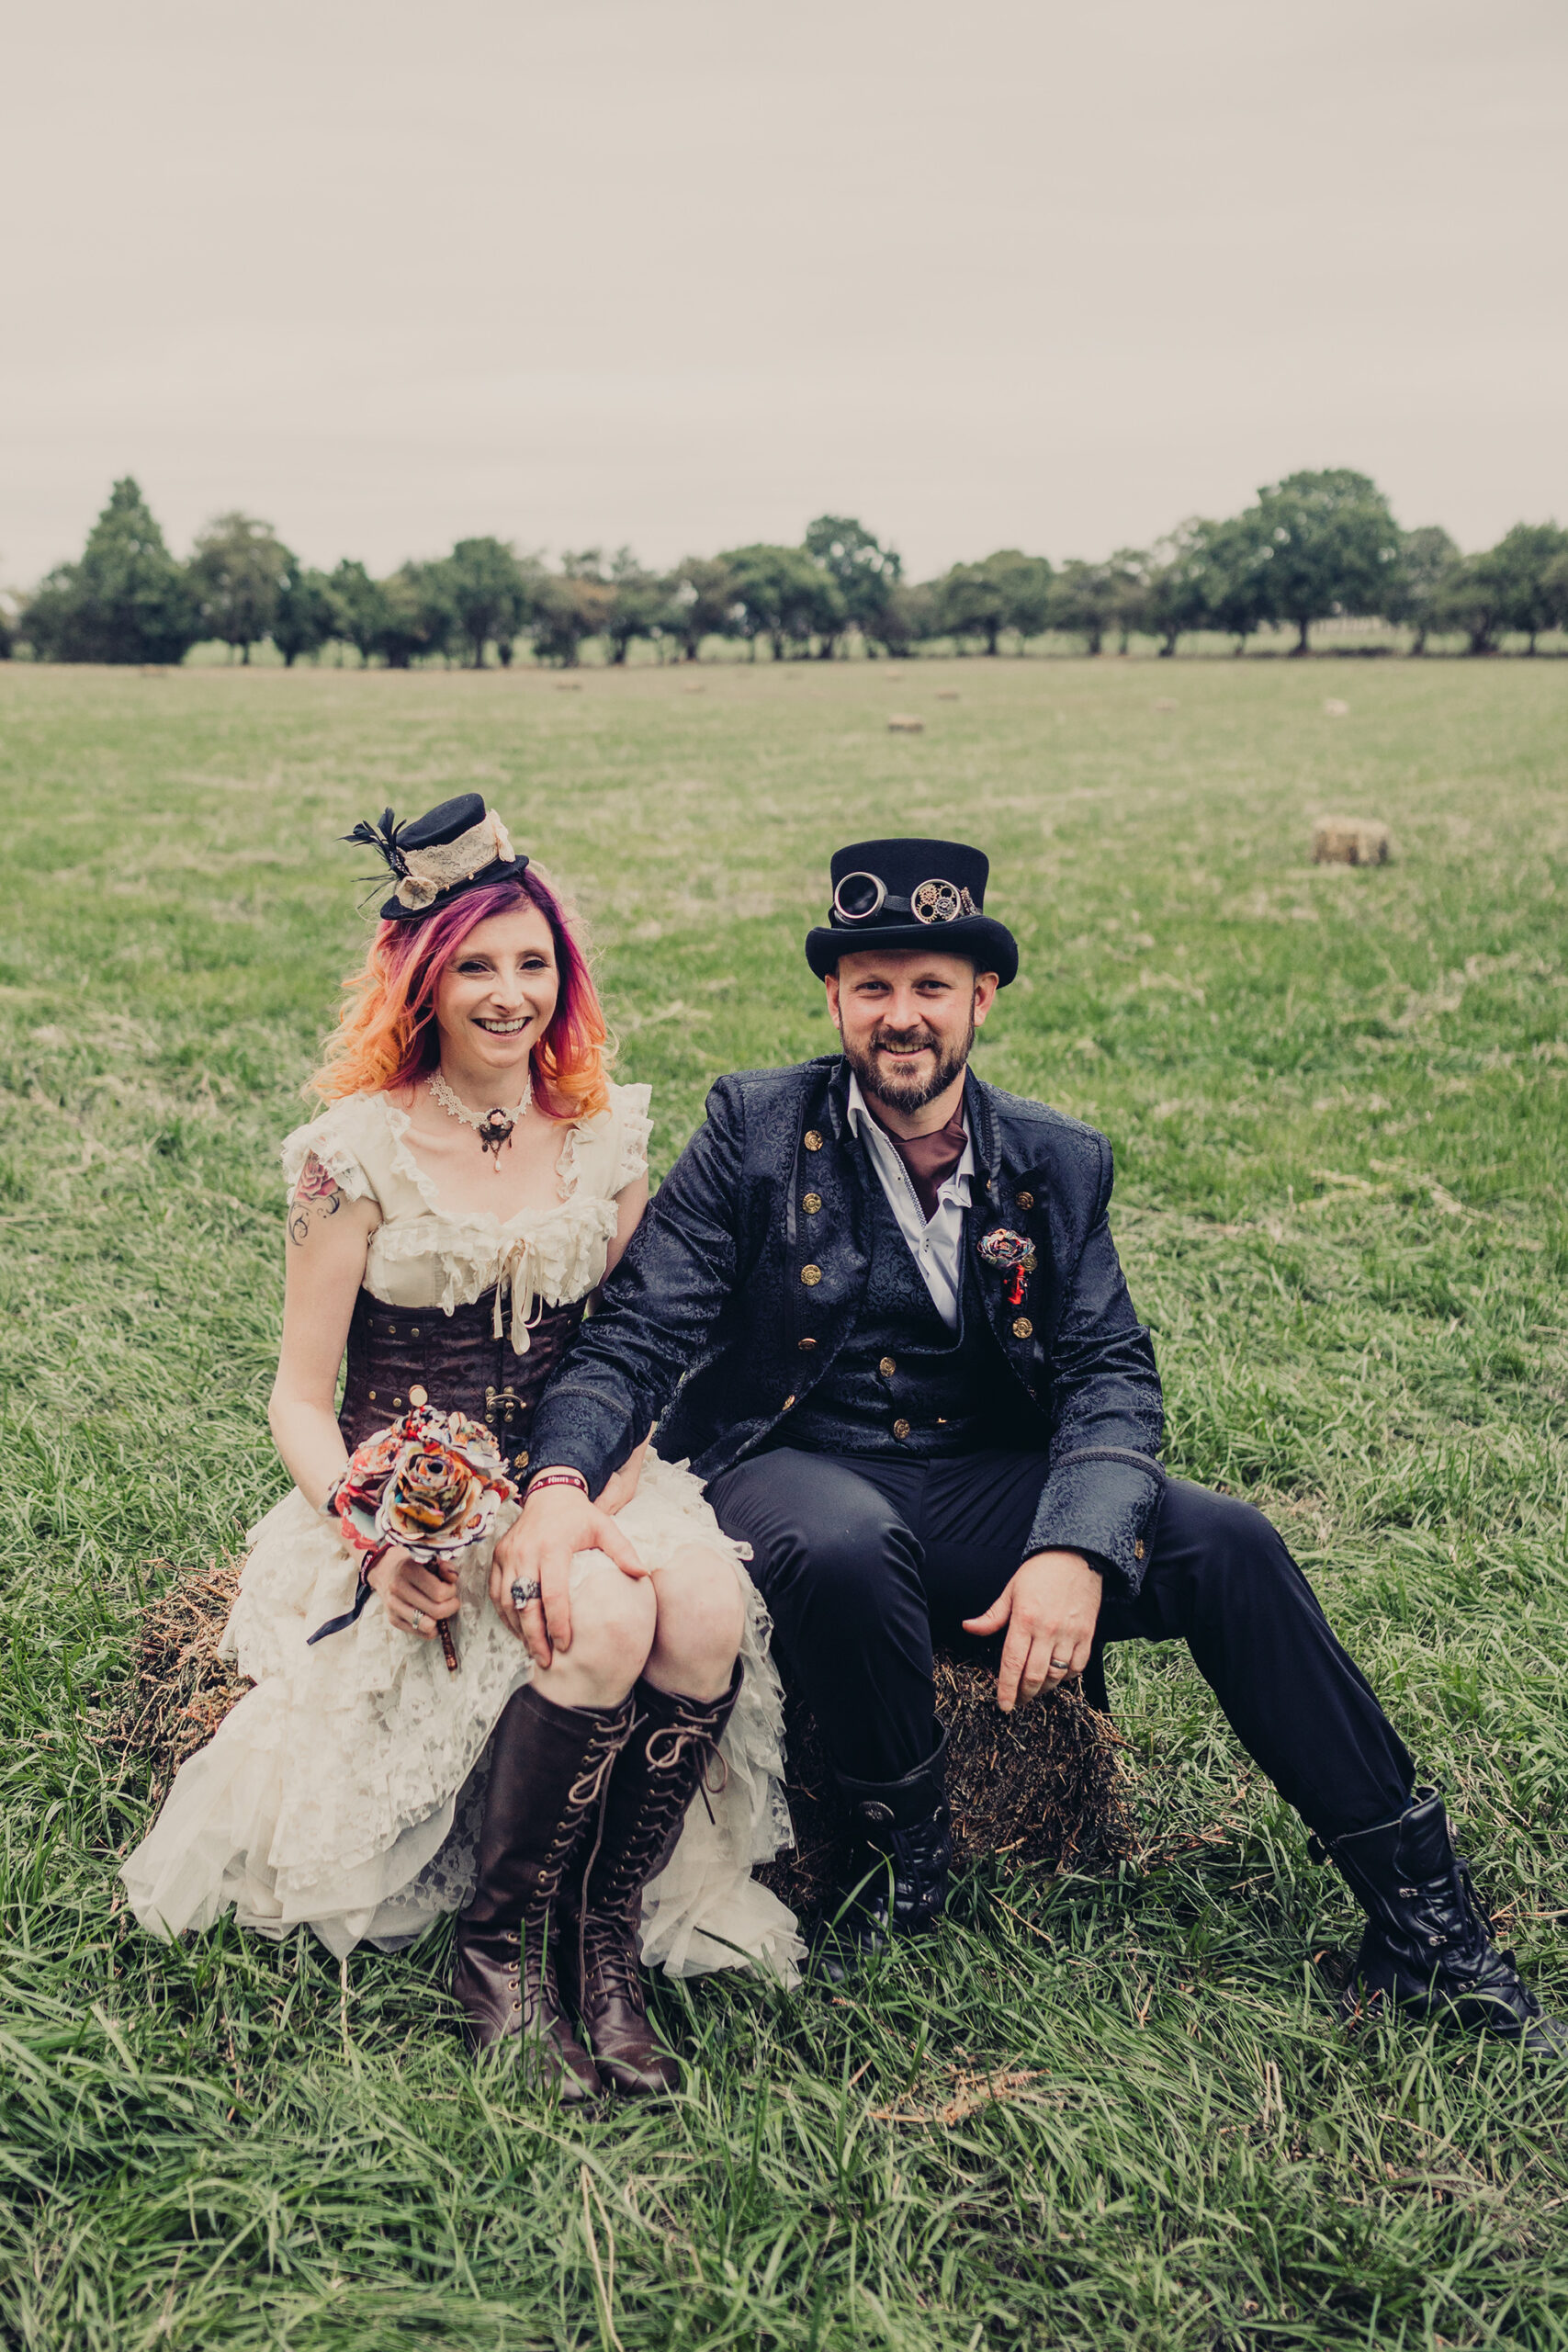 April Rien Steampunk Festival Wedding Chelsea Shoesmith Photography SBS 026 scaled